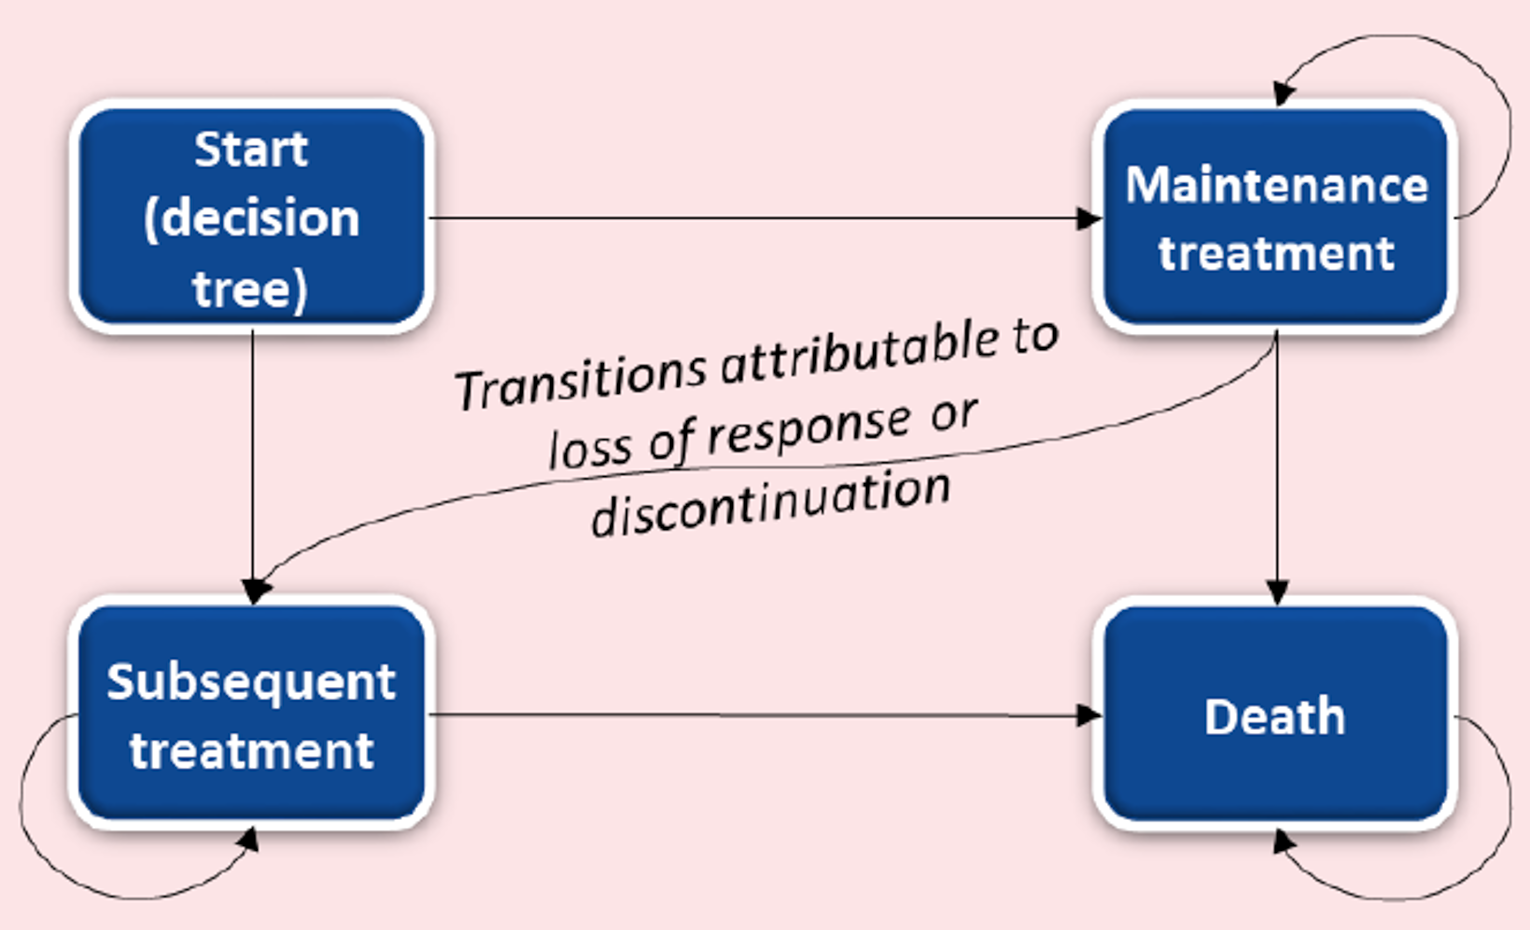 A diagram describing a Markov model with 4 states: ‘Start (decision tree)’, ‘Maintenance treatment’, ‘Subsequent treatment’, and ‘Death’. Arrows connect each state to each other. The arrow between ‘Maintenance treatment’ and ‘Subsequent treatment’ is labelled ‘Transitions attributable to loos of response or discontinuation’.